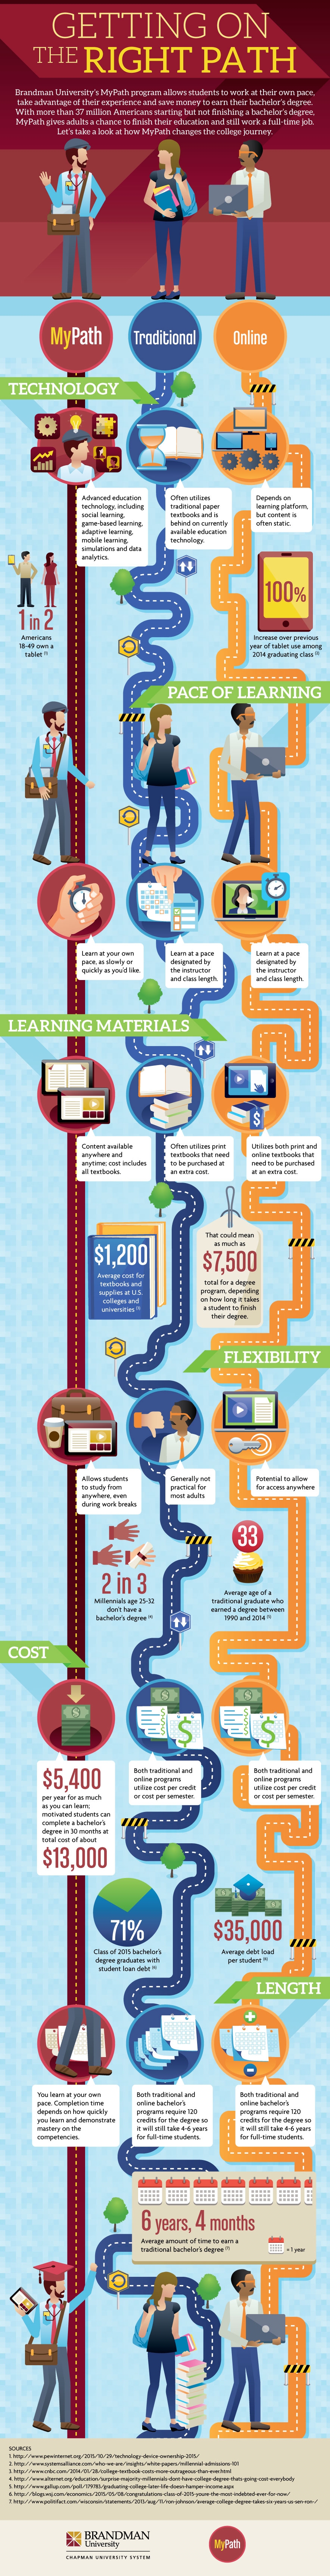 This infographic compares MyPath to the traditional student journey.